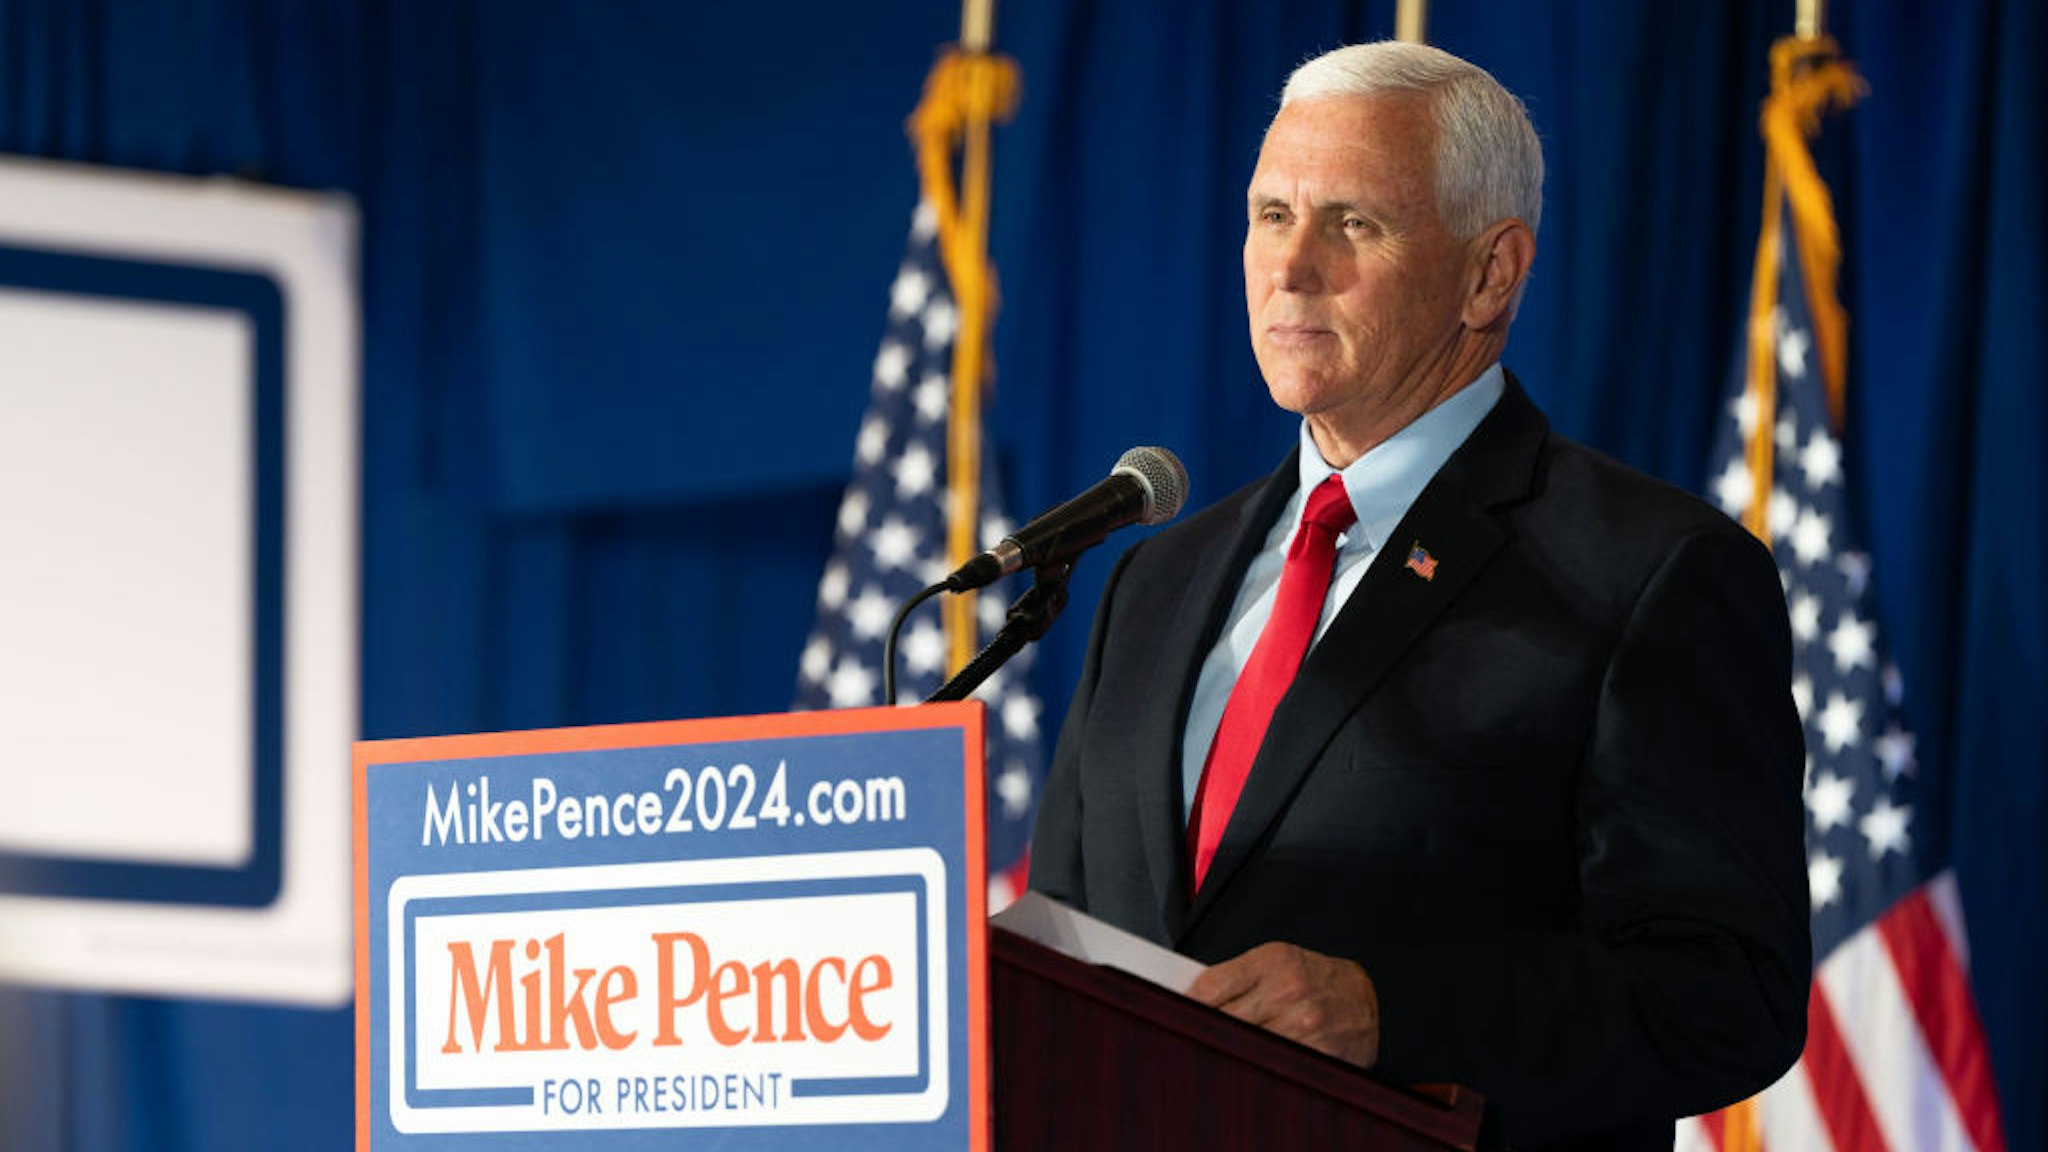 Former US Vice President Mike Pence during a campaign event at LaBelle Winery Event Center in Derry, New Hampshire, US, on Friday, June 9, 2023. Pence this week kicked off his campaign challenging Donald Trump for the 2024 Republican presidential nomination with a stinging rebuke of his onetime boss, saying he should never return to the White House.